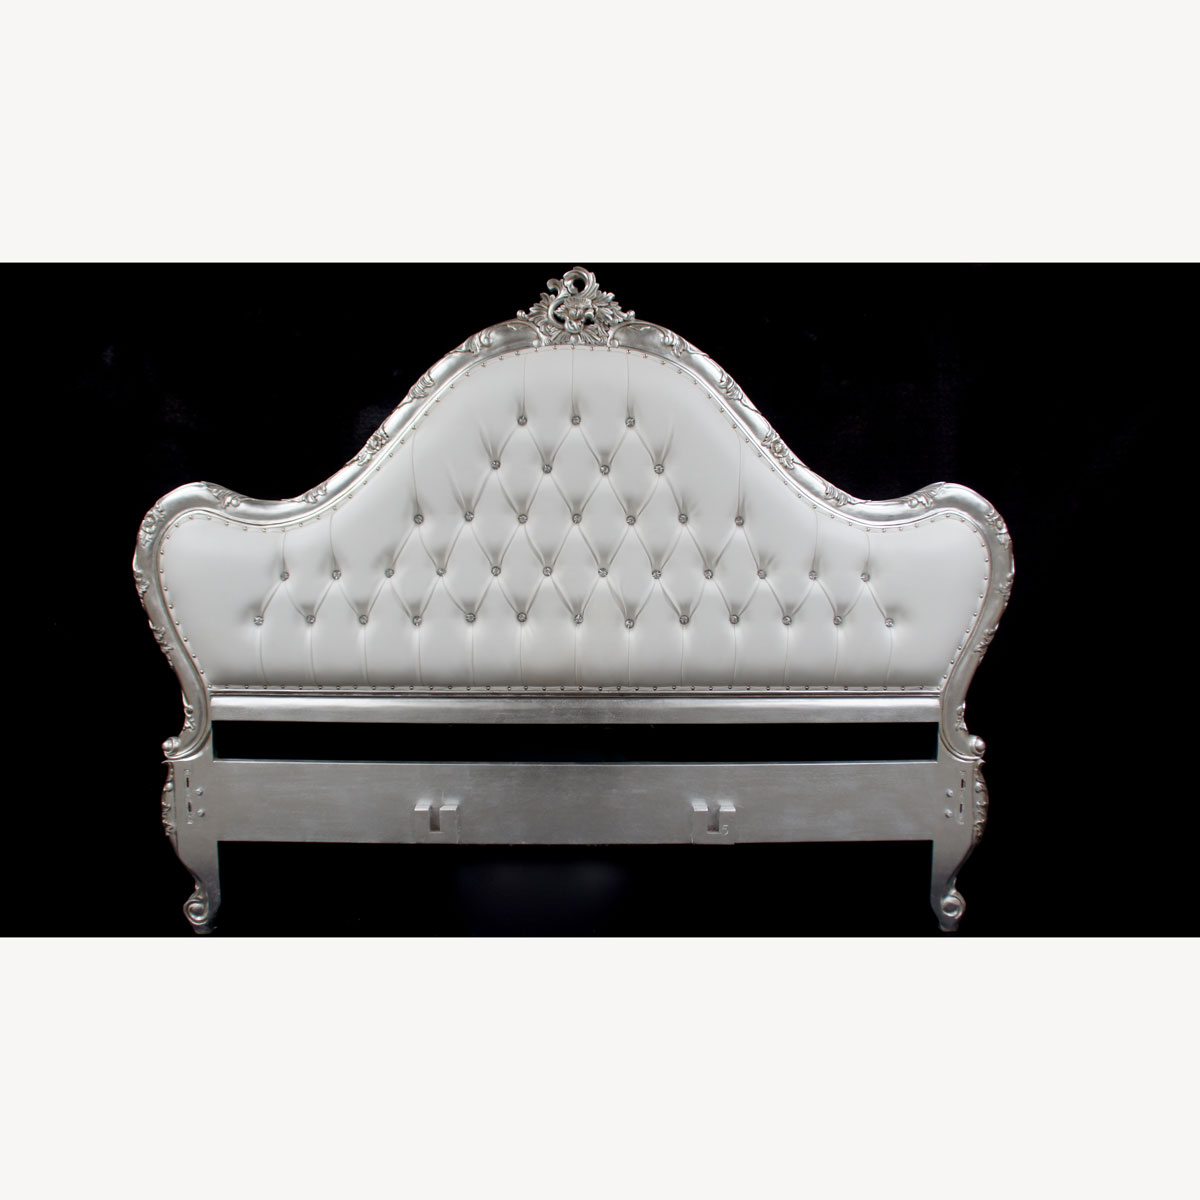 Charles French Louis Style Bed In Silver Leaf And Upholstered In A White Faux Leather Fabric Crystal Buttons 2 - Hampshire Barn Interiors - Charles French Louis Style Bed In Silver Leaf And Upholstered In A White Faux Leather Fabric Crystal Buttons -